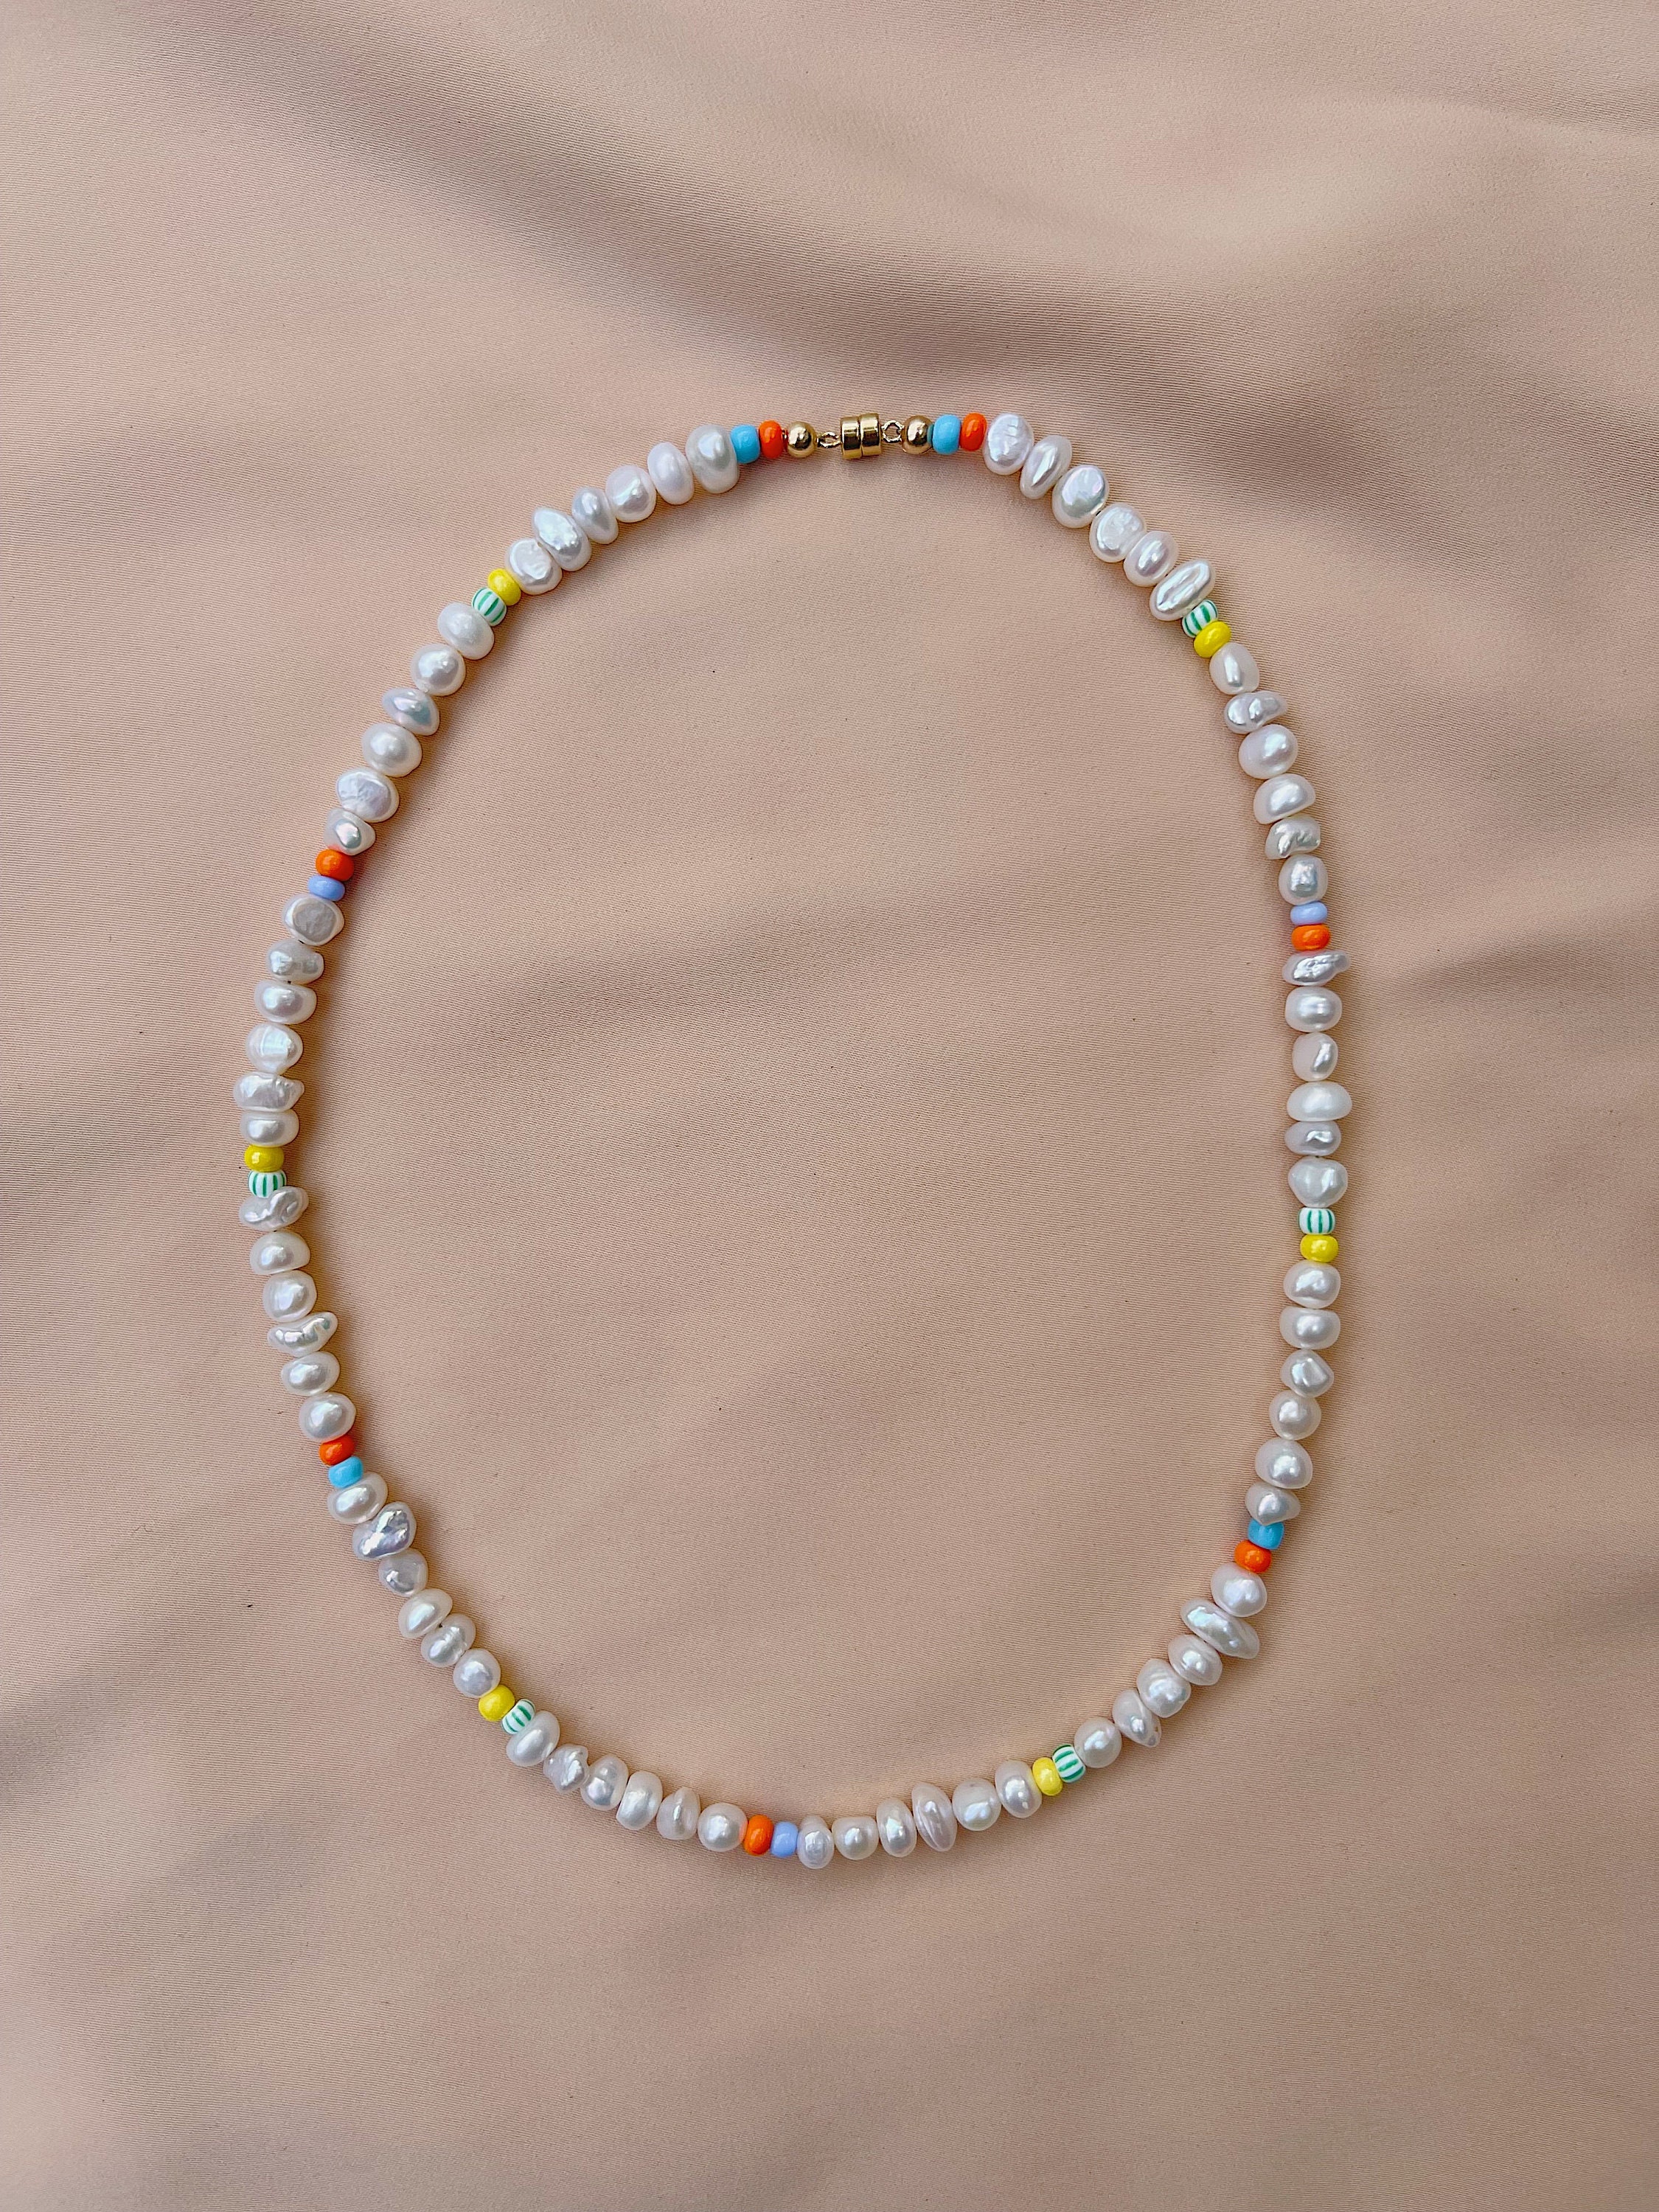 Shop — Mon Ete Studio | Colorful Beaded Jewelry with Freshwater Pearls ...